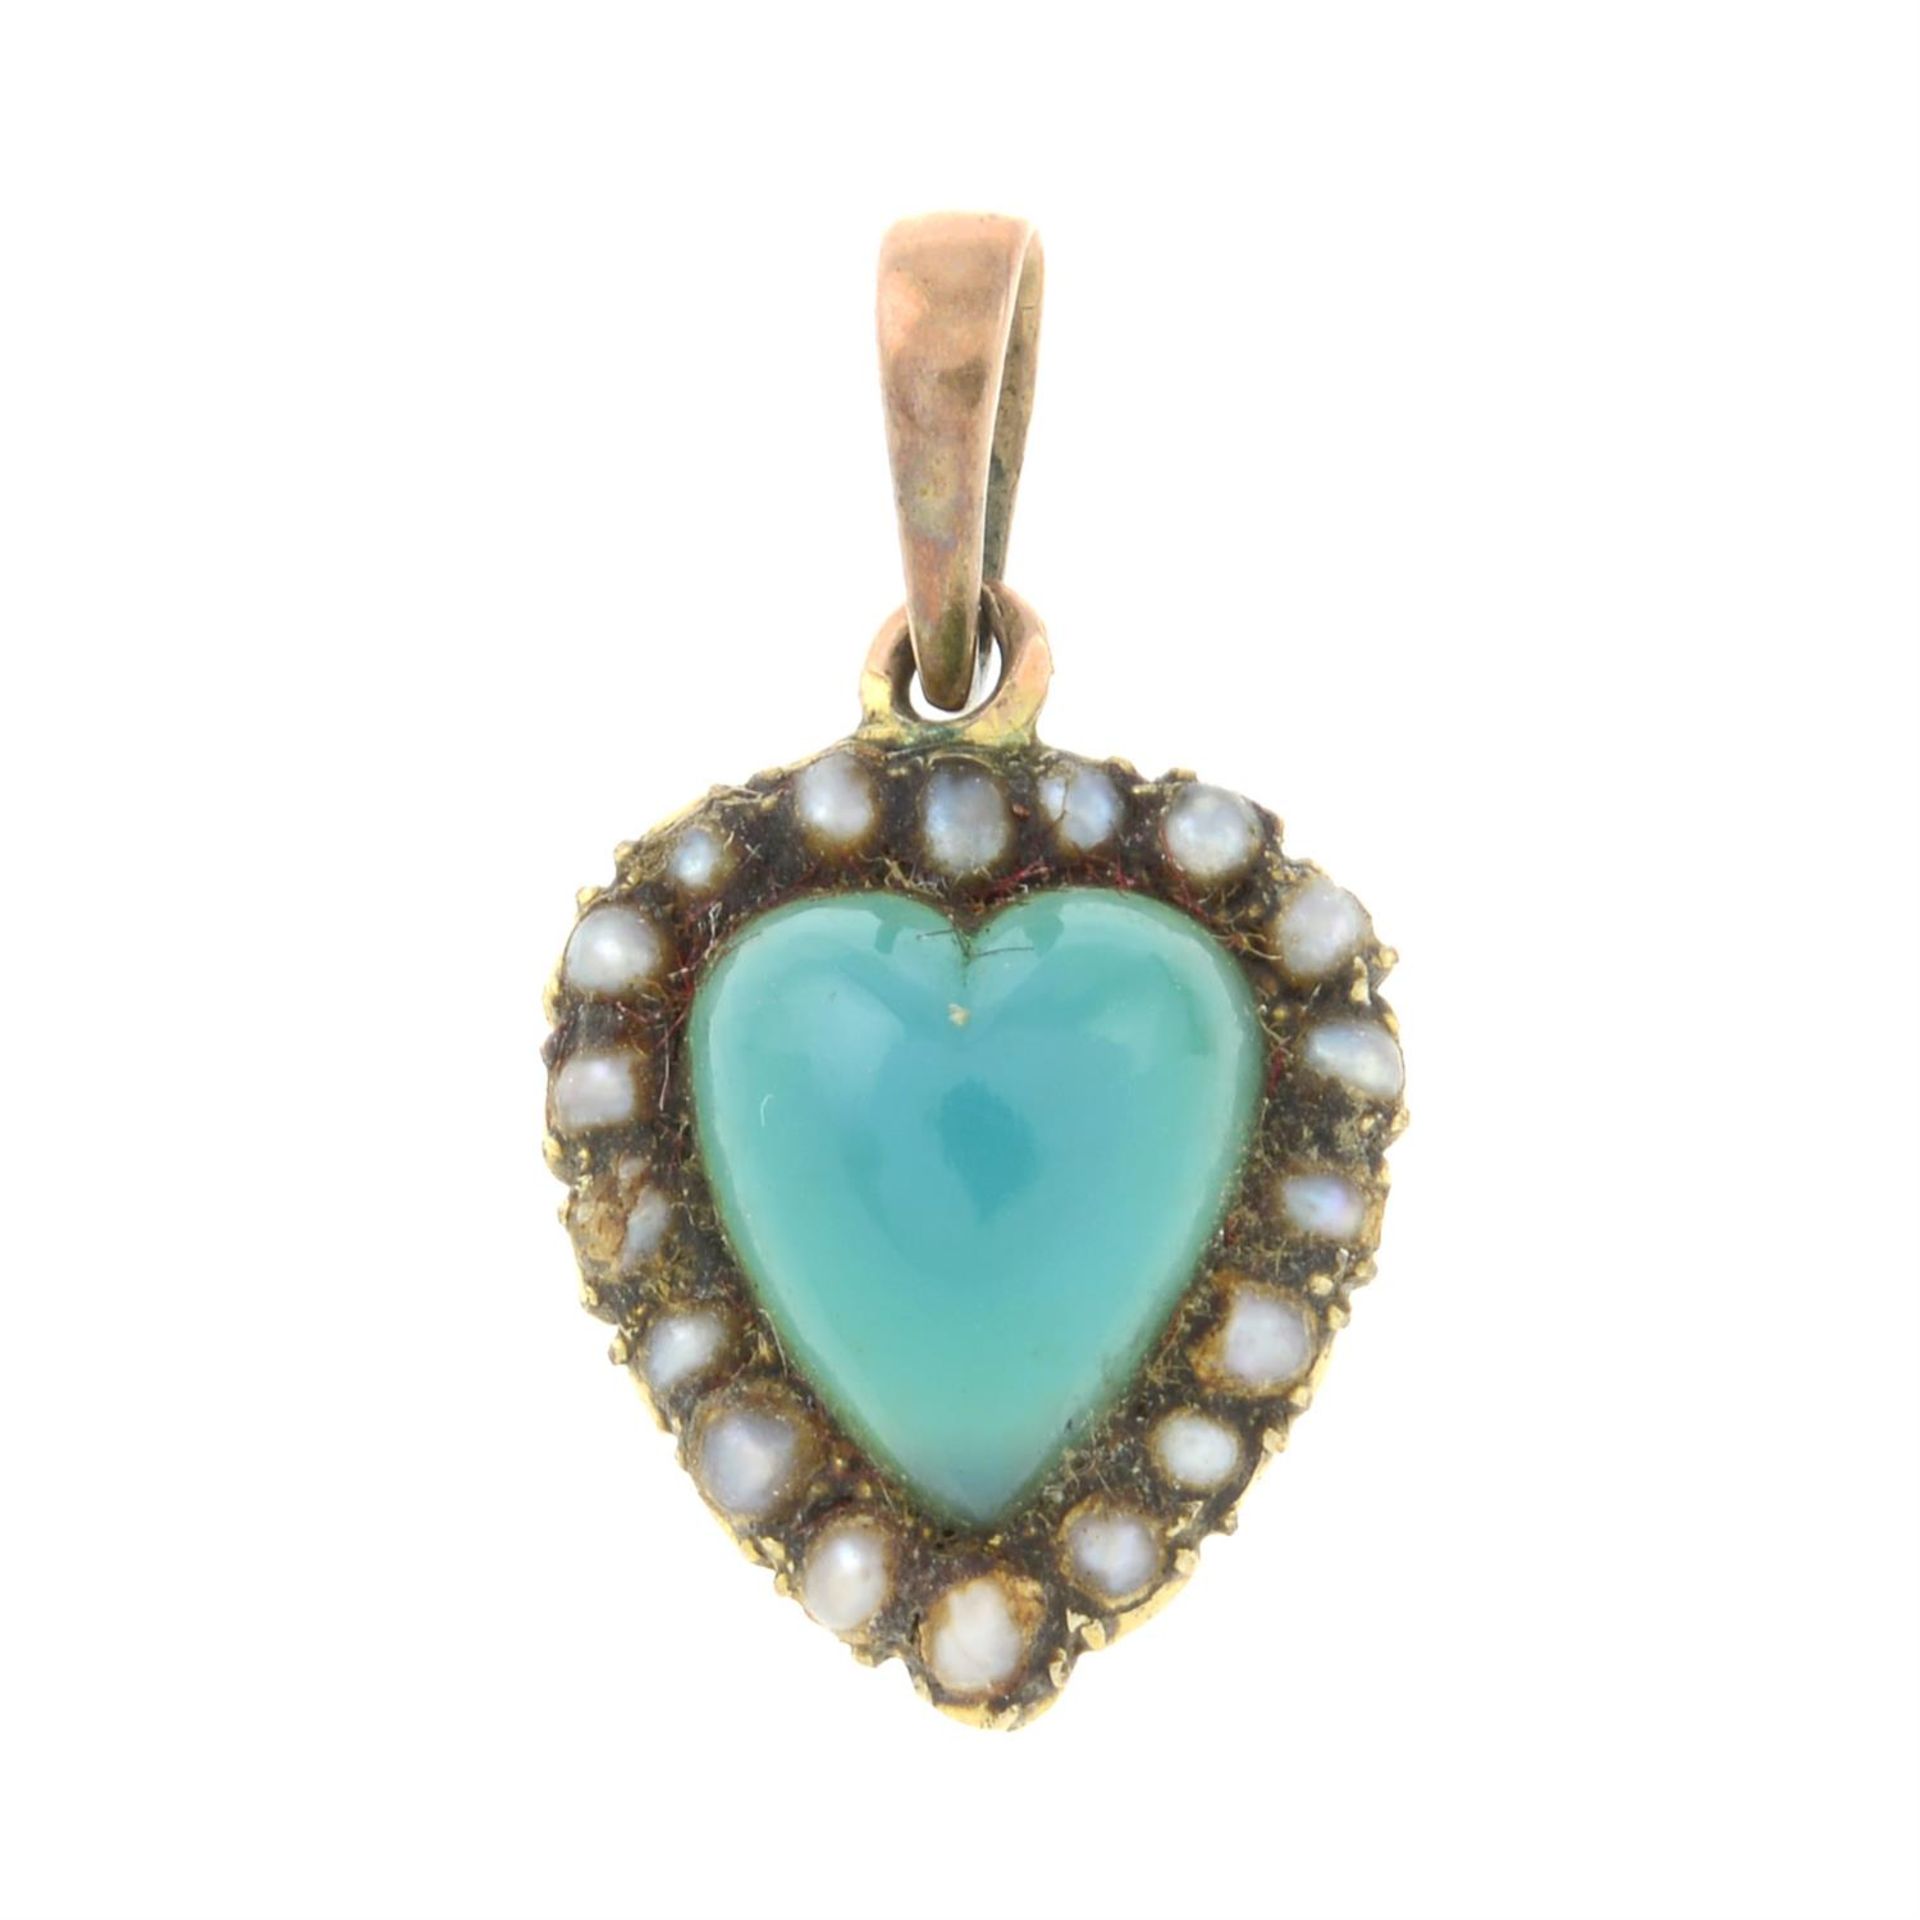 A 19th century, 9ct gold, chalcedony and seed pearl heart pendant.